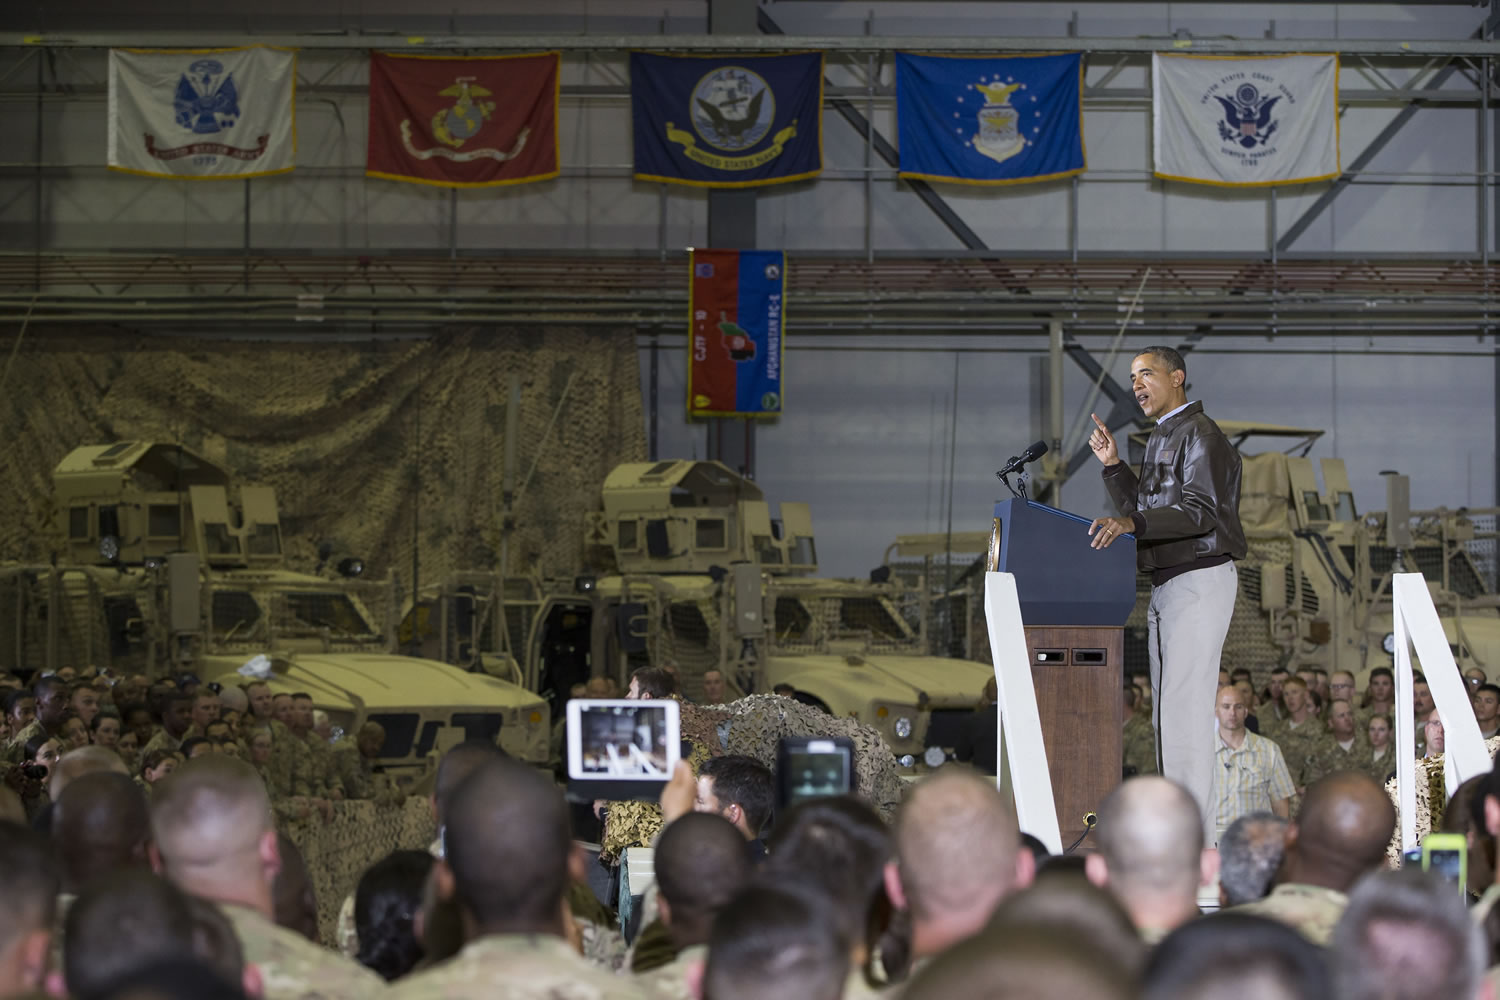 President Barack Obama gestures as he speaks to troops at Bagram Air Field north of Kabul, Afghanistan during an unannounced visit, on Sunday.